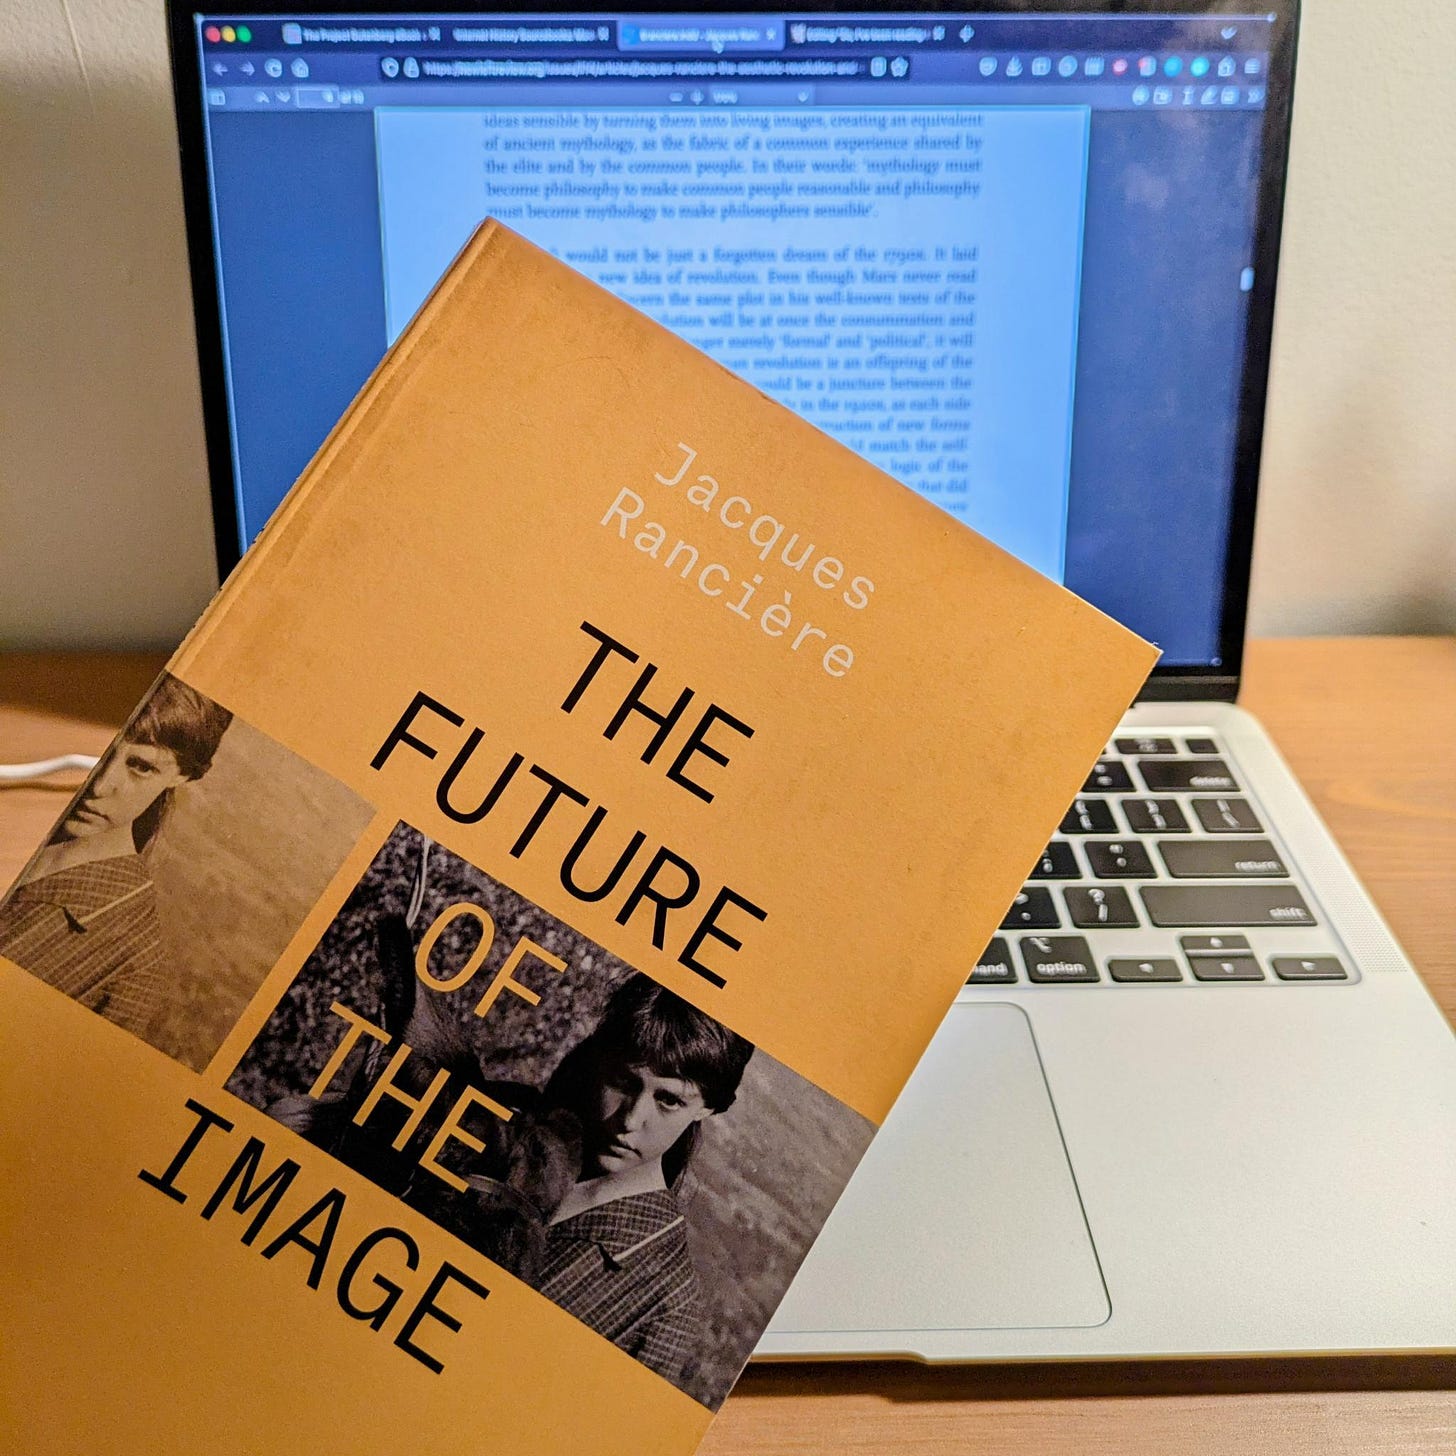 Photo of a laptop computer out of focus with a text on the screen, in front of which is the book "The Future of the Image" with a bright yellow cover.